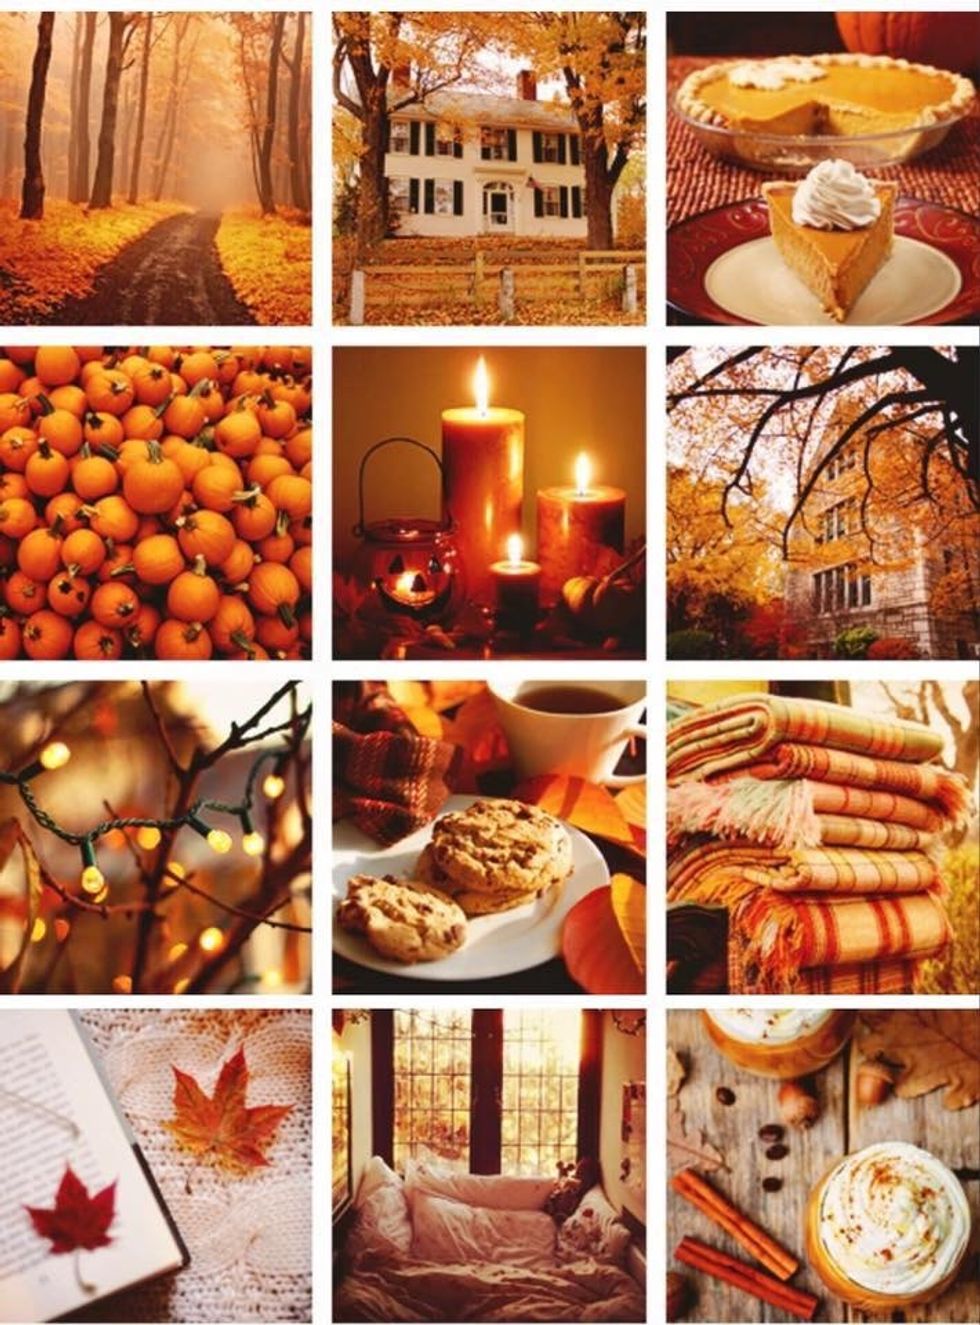 I Know It's July, But Here Are Several Things I Can't Wait For When Fall Comes